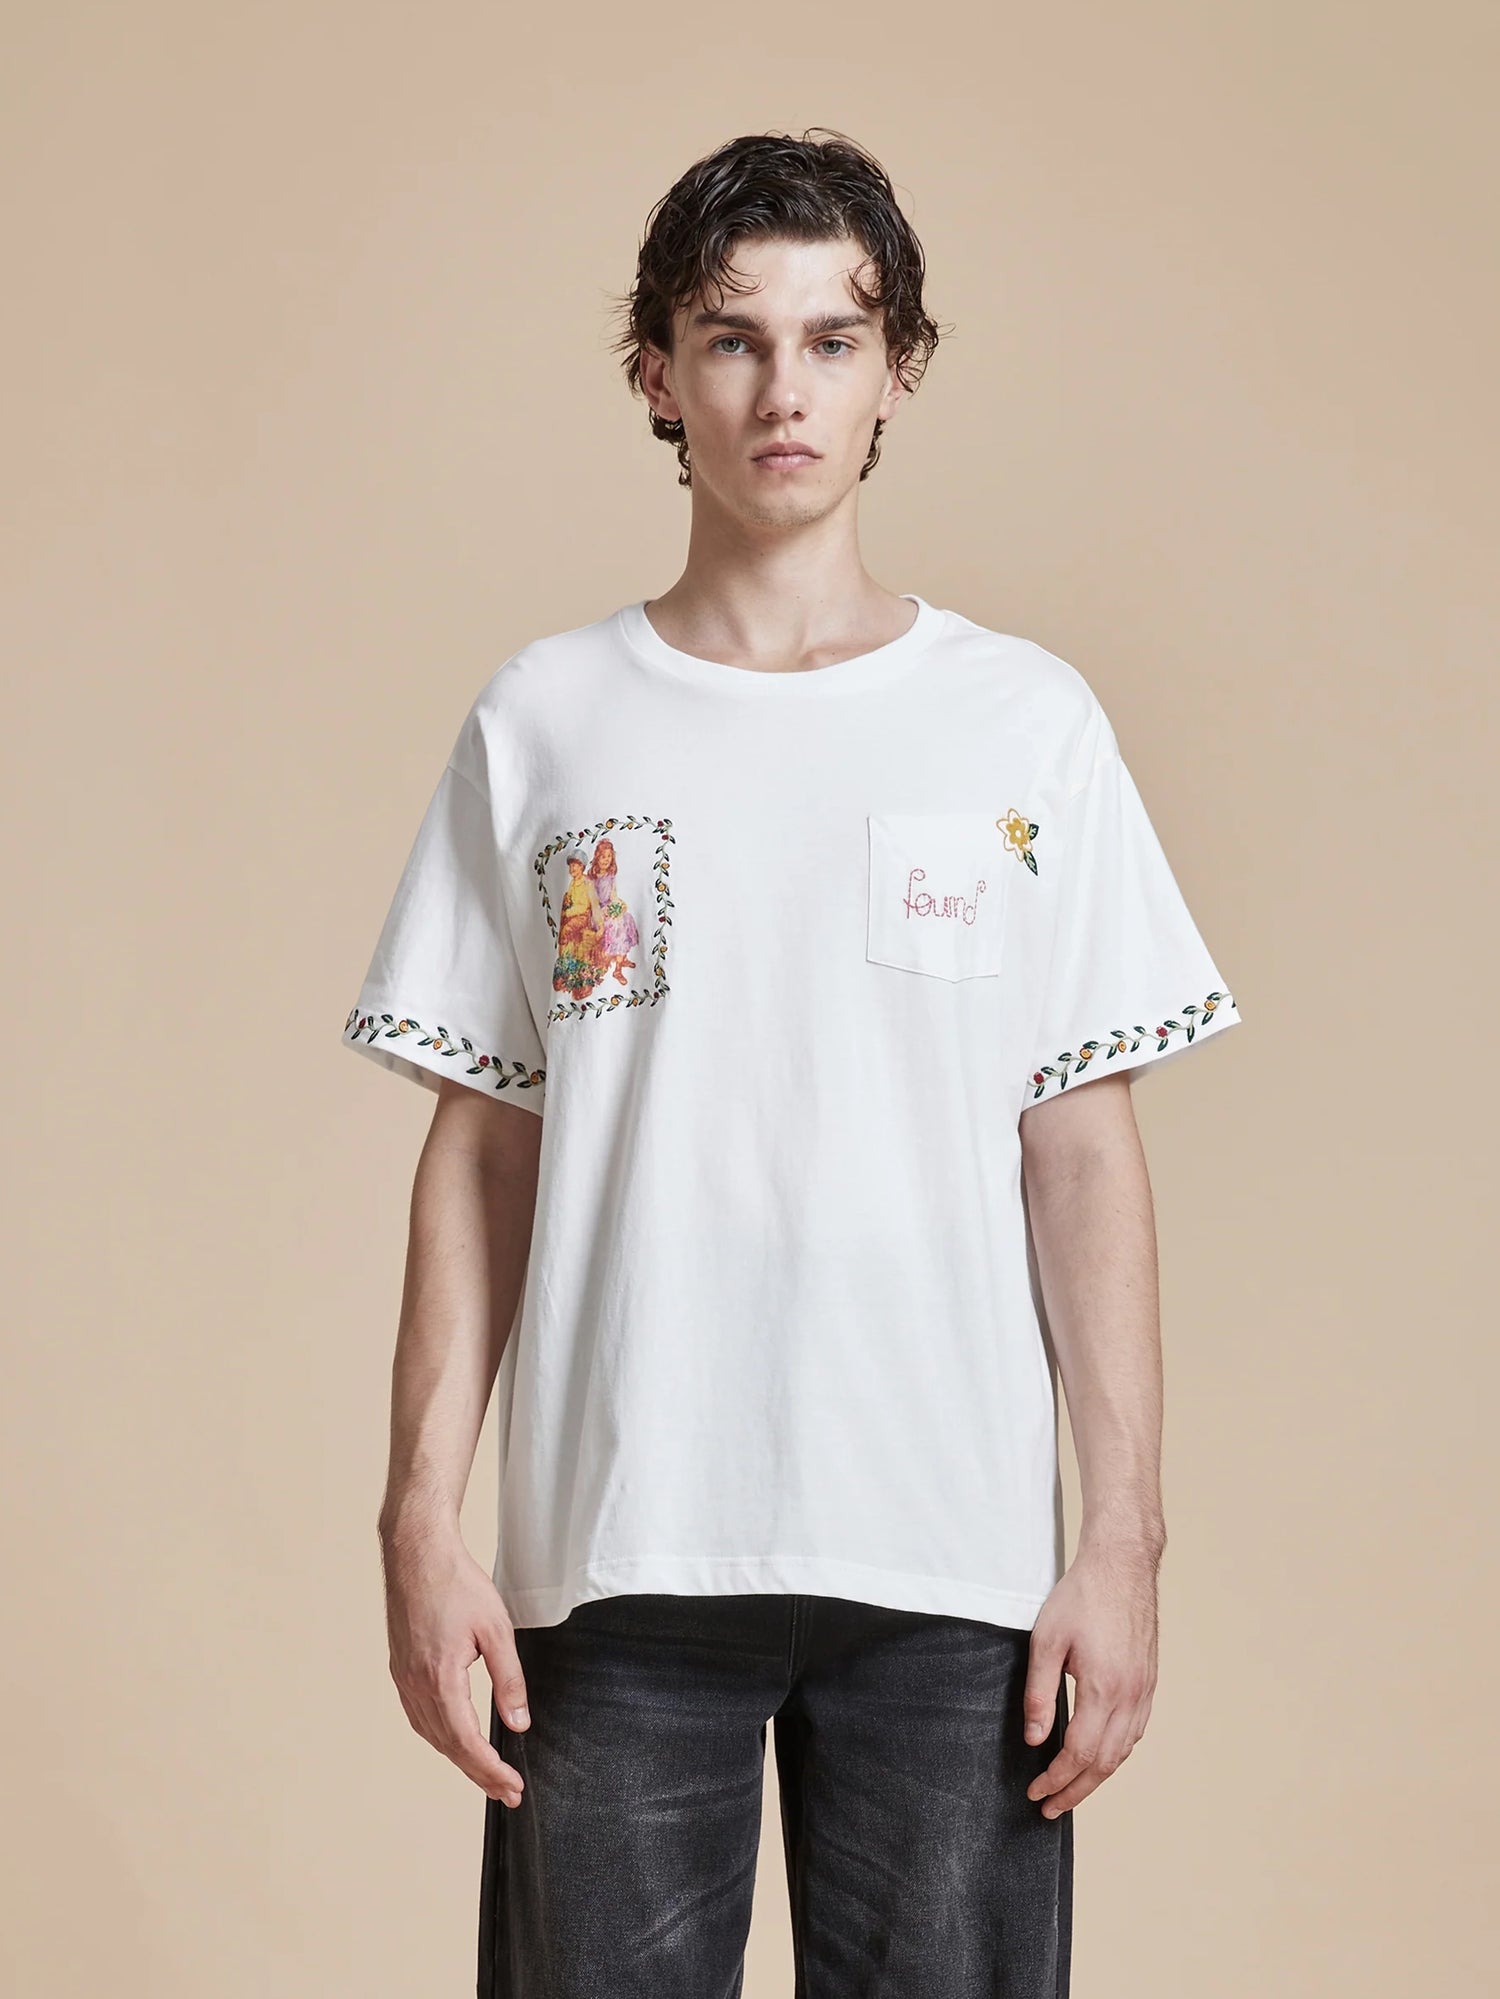 A man wearing a Found Flower Children Tee with an embroidered pocket featuring floral Phulkari style embroideries, showcasing American folk art influence.